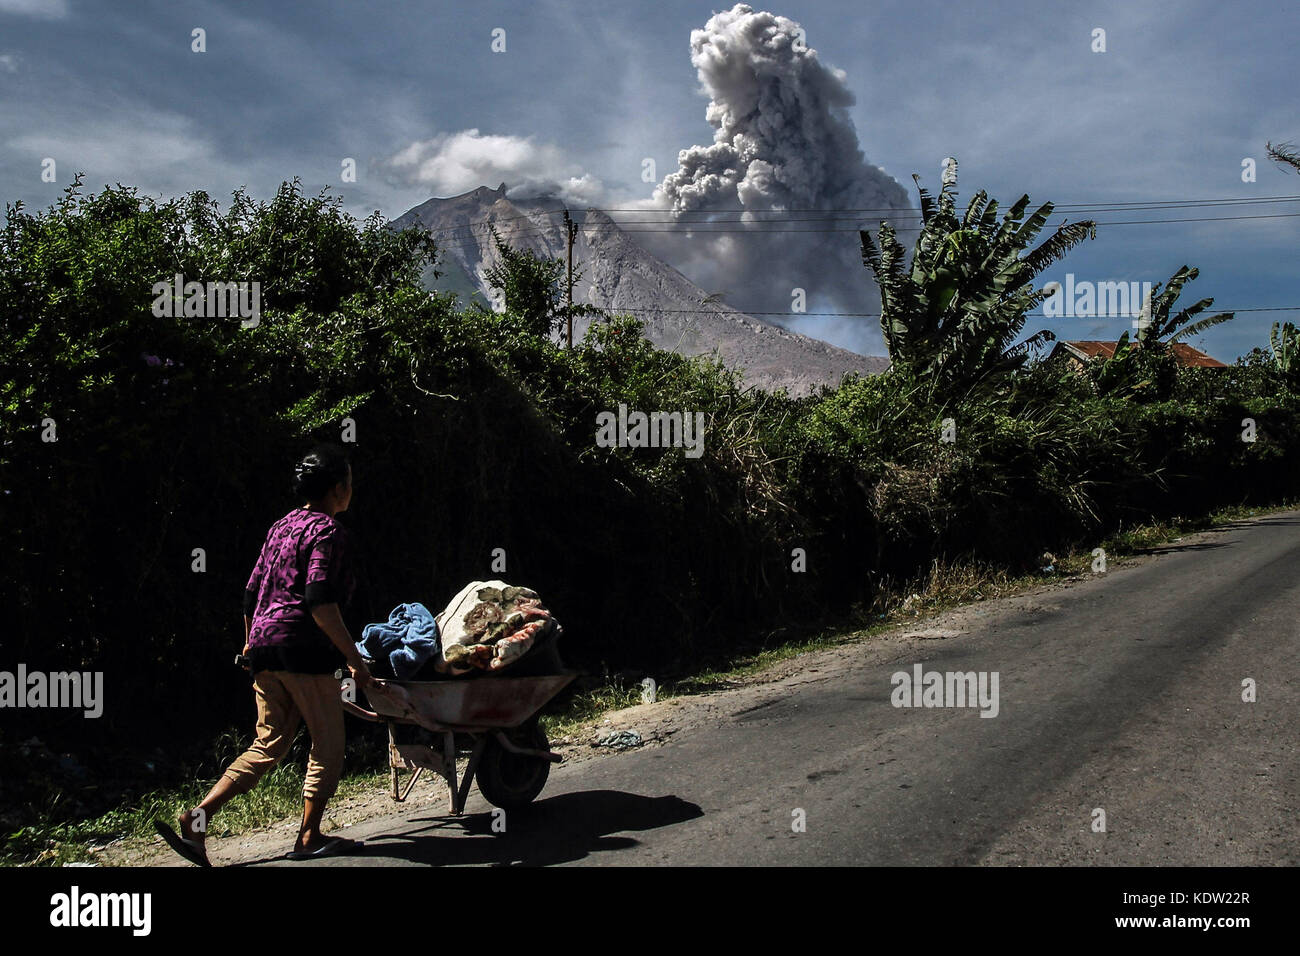 Karo, North Sumatra, Indonesia. 16th Oct, 2017. The villagers of Tiga Pancur walk near the volcano of Mount Sinabung which spewed dust as seen in Karo, North Sumatera province, on 16 October 2017. A huge volcano in Indonesia erupted on Sunday, spewing hot ash into the air. Thousands were evacuated after Mount Sinabung started erupting and spewing ash half a kilometre into the air. The volcano began erupting in 2010 after lying dormant for four centuries. A large eruption in May 2016 killed seven people. Credit: Ivan Damanik/ZUMA Wire/Alamy Live News Stock Photo